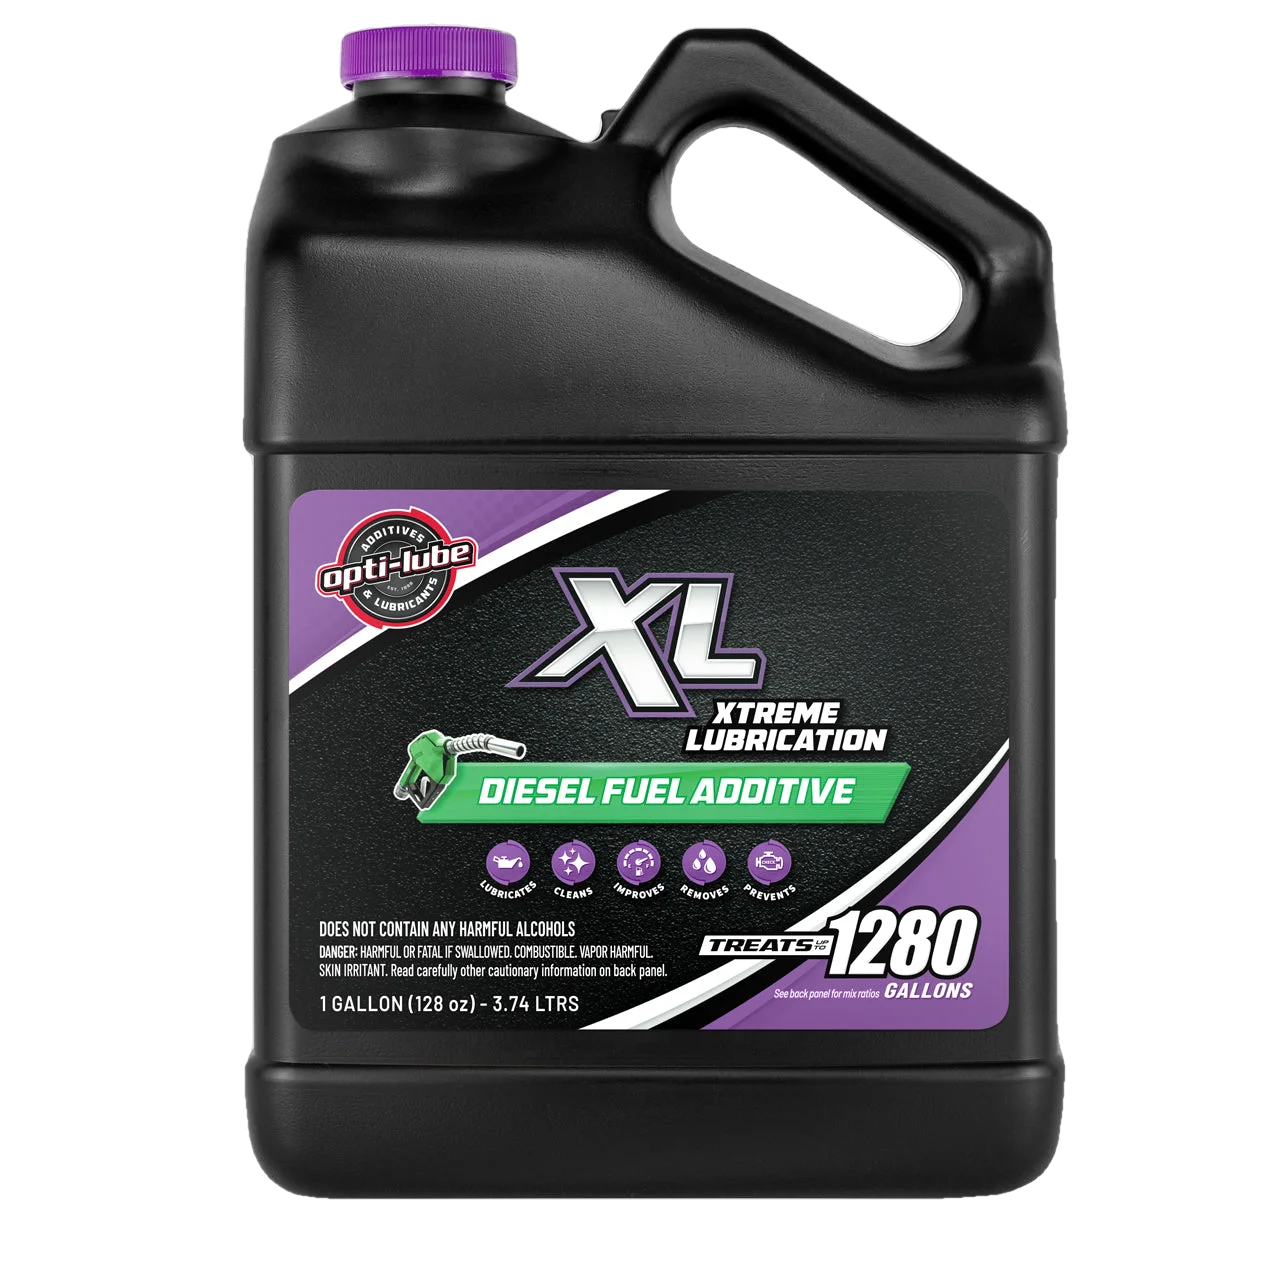 Opti-Lube XL Xtreme Lubricant Diesel Fuel Additive: 1 Gallon Without Accessories, Treats up to 1,280 Gallons